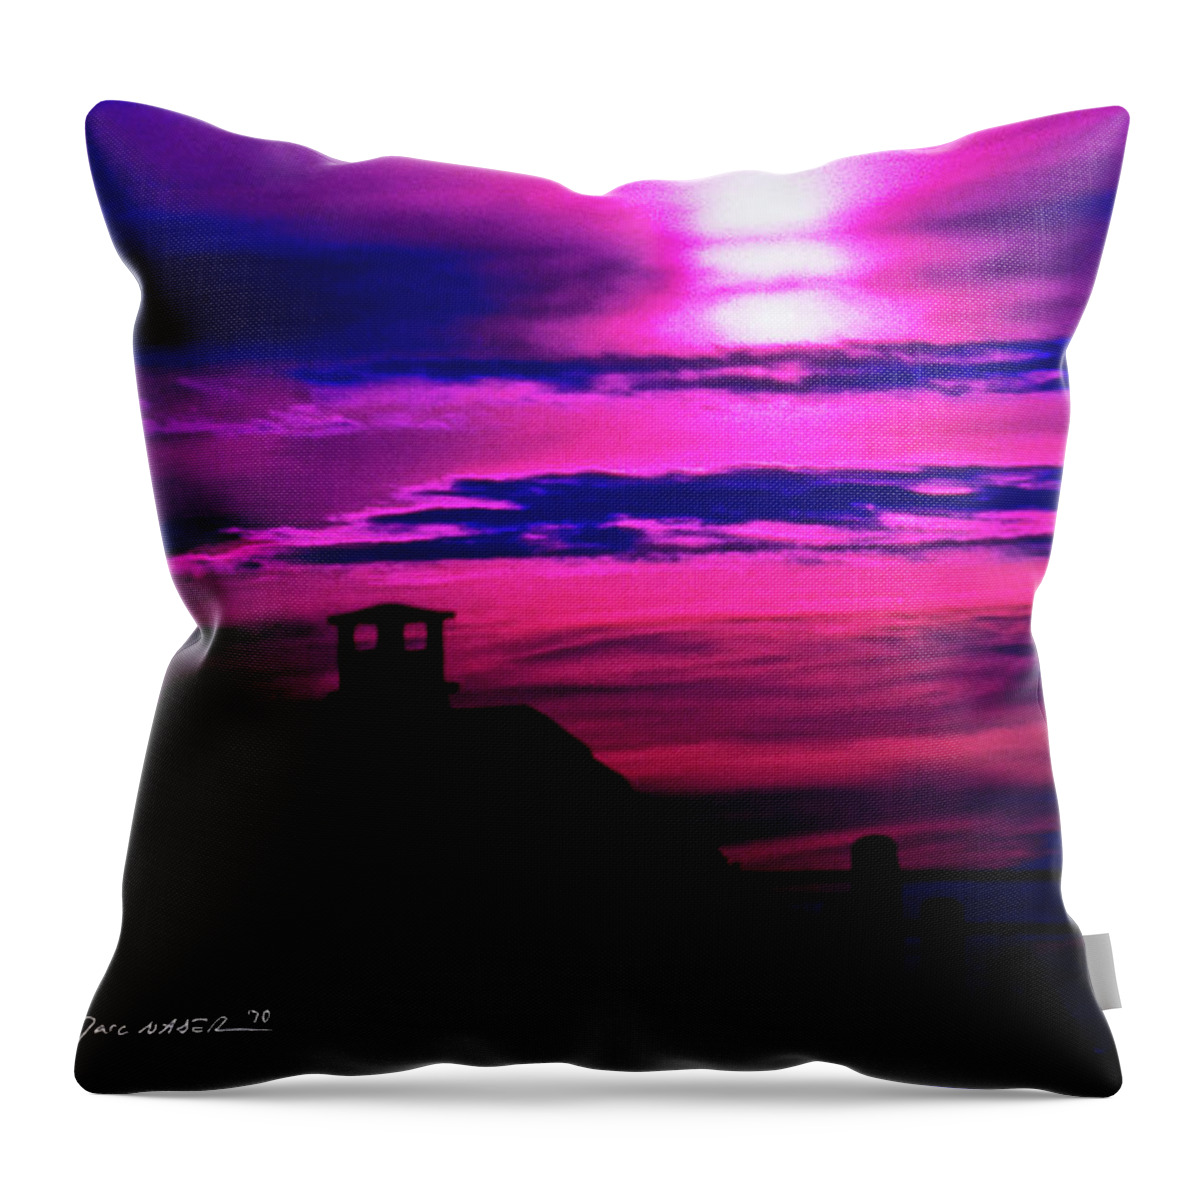 Violetsunset Throw Pillow featuring the photograph Sunset In Sete, Southern France by Marc Nader